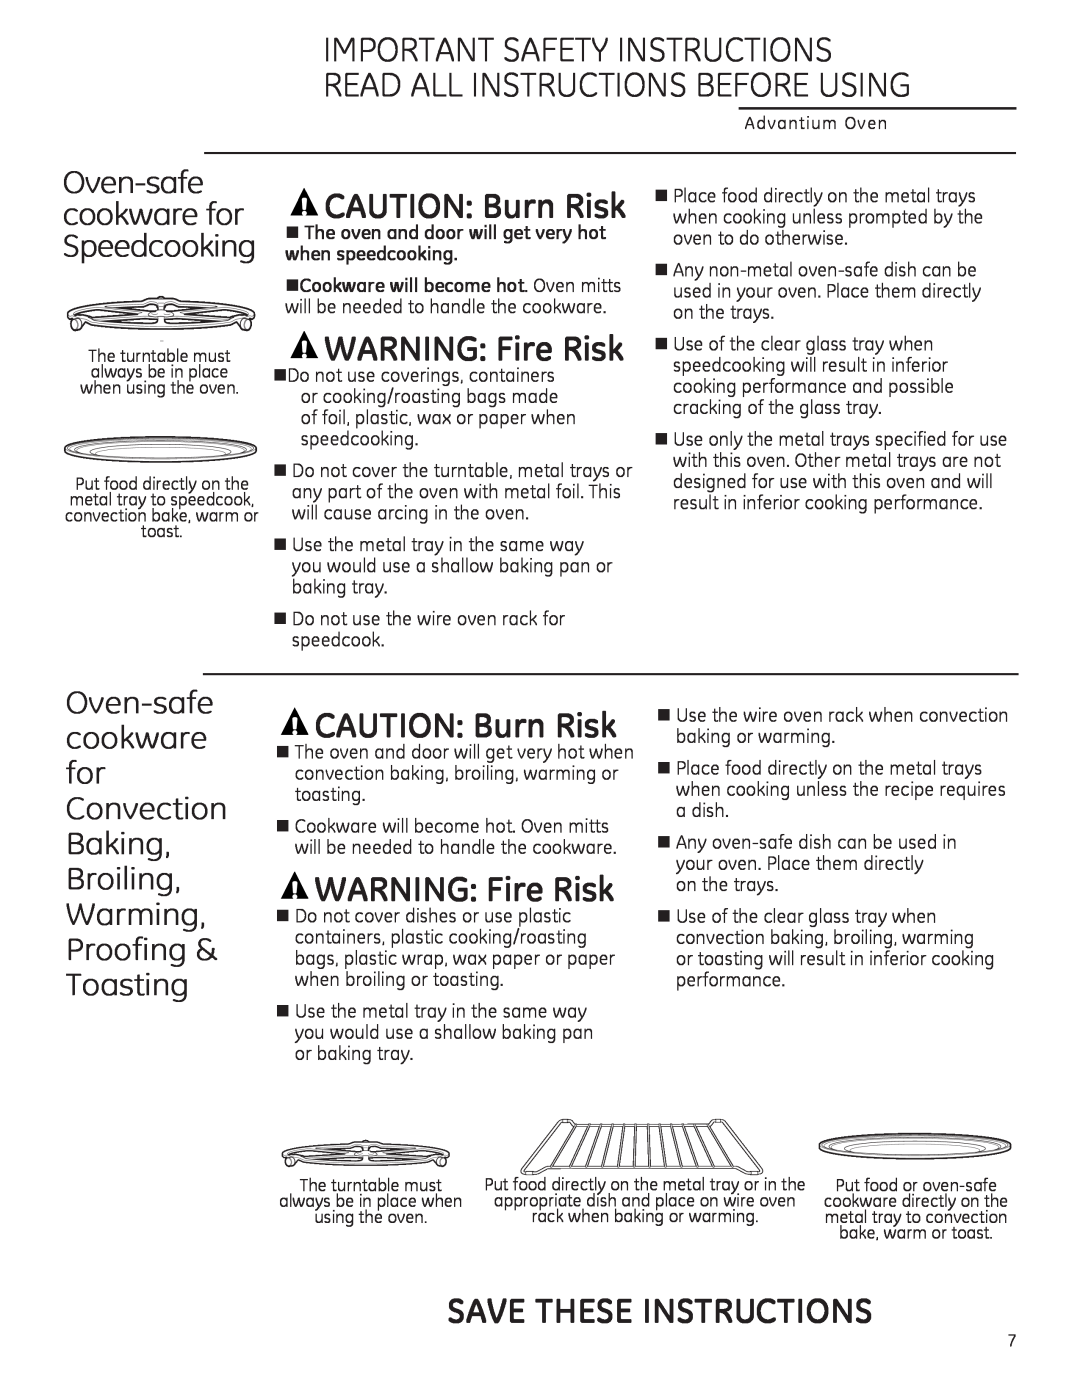 GE PSA1201, PSA1200 WARNING: Fire Risk, Oven-safecookware for Speedcooking, Save These Instructions, CAUTION: Burn Risk 